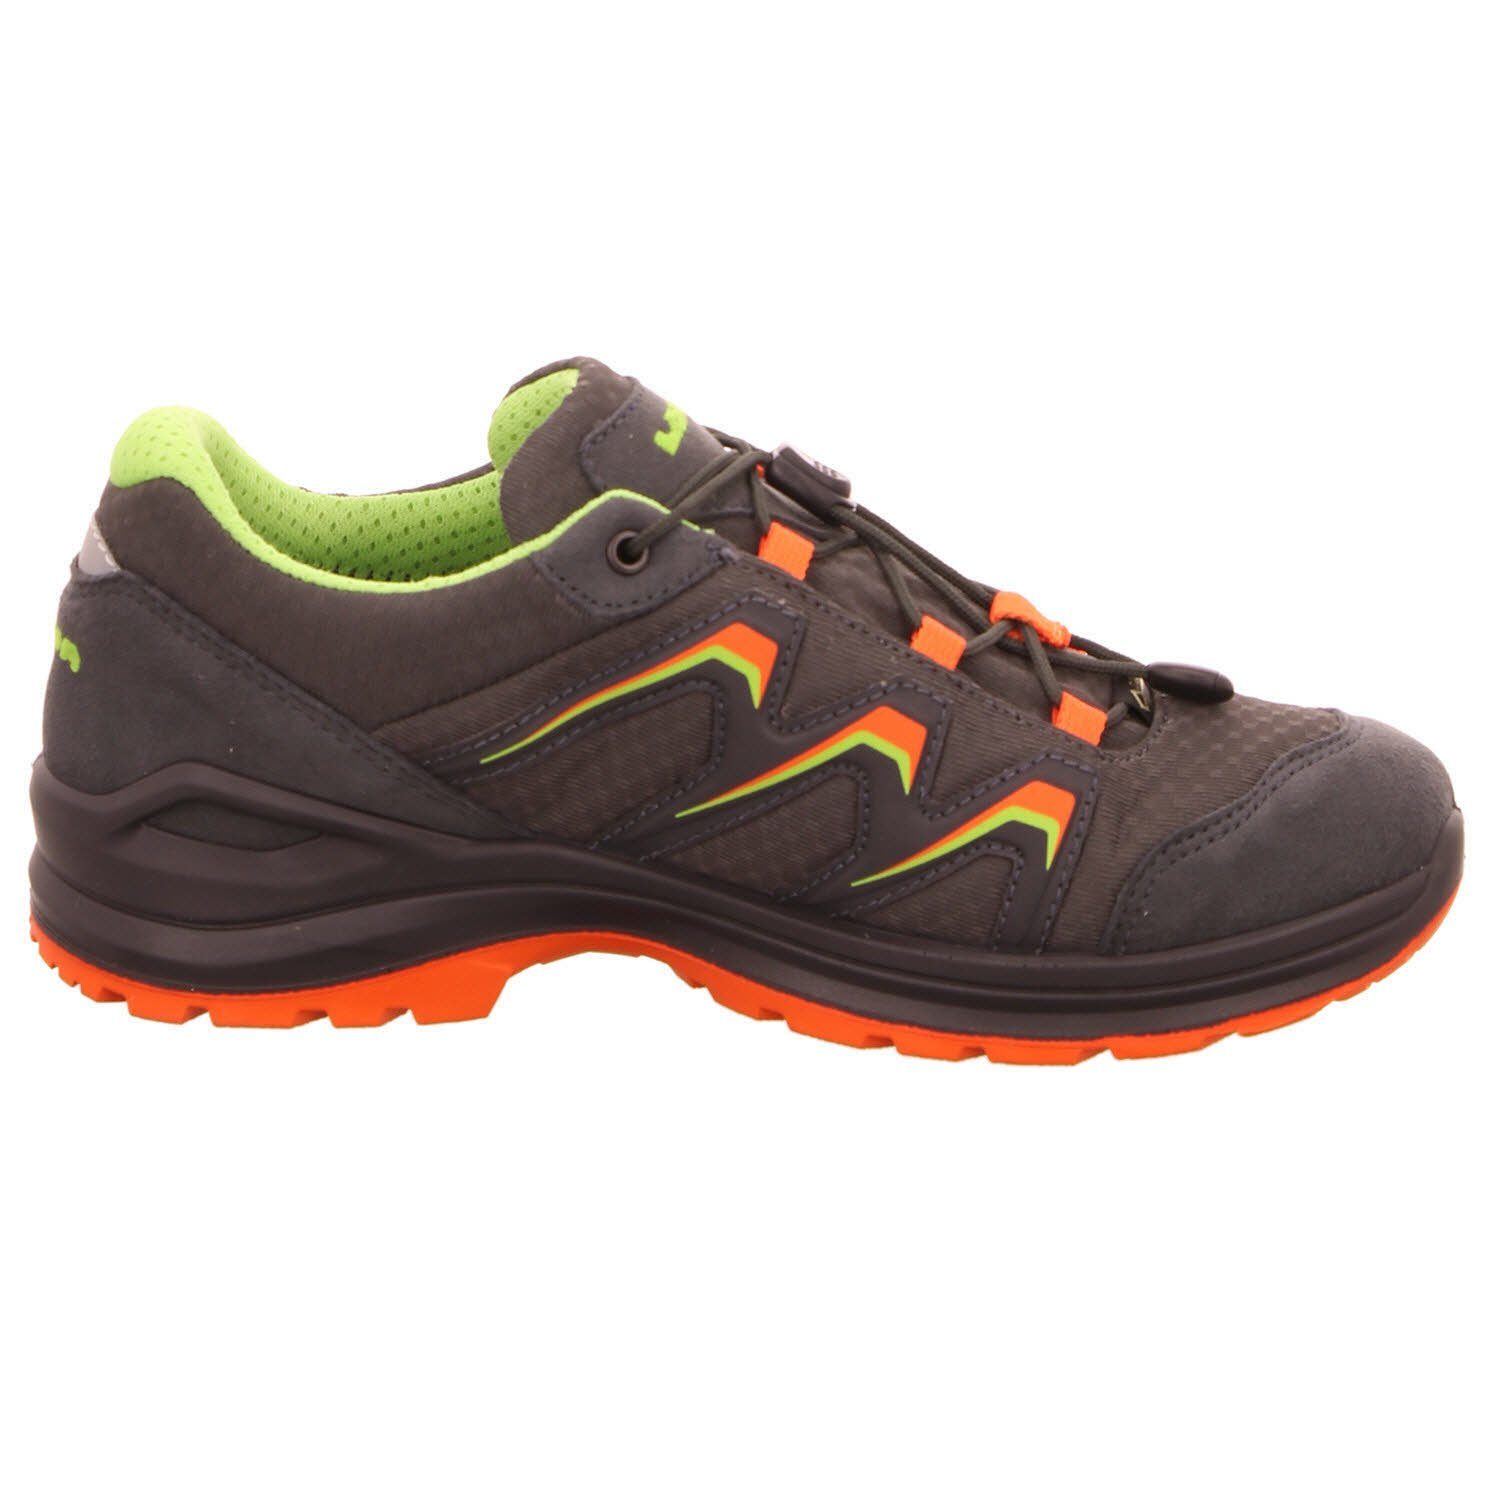 Outdoorschuh GRAPHIT/FLAME Lowa